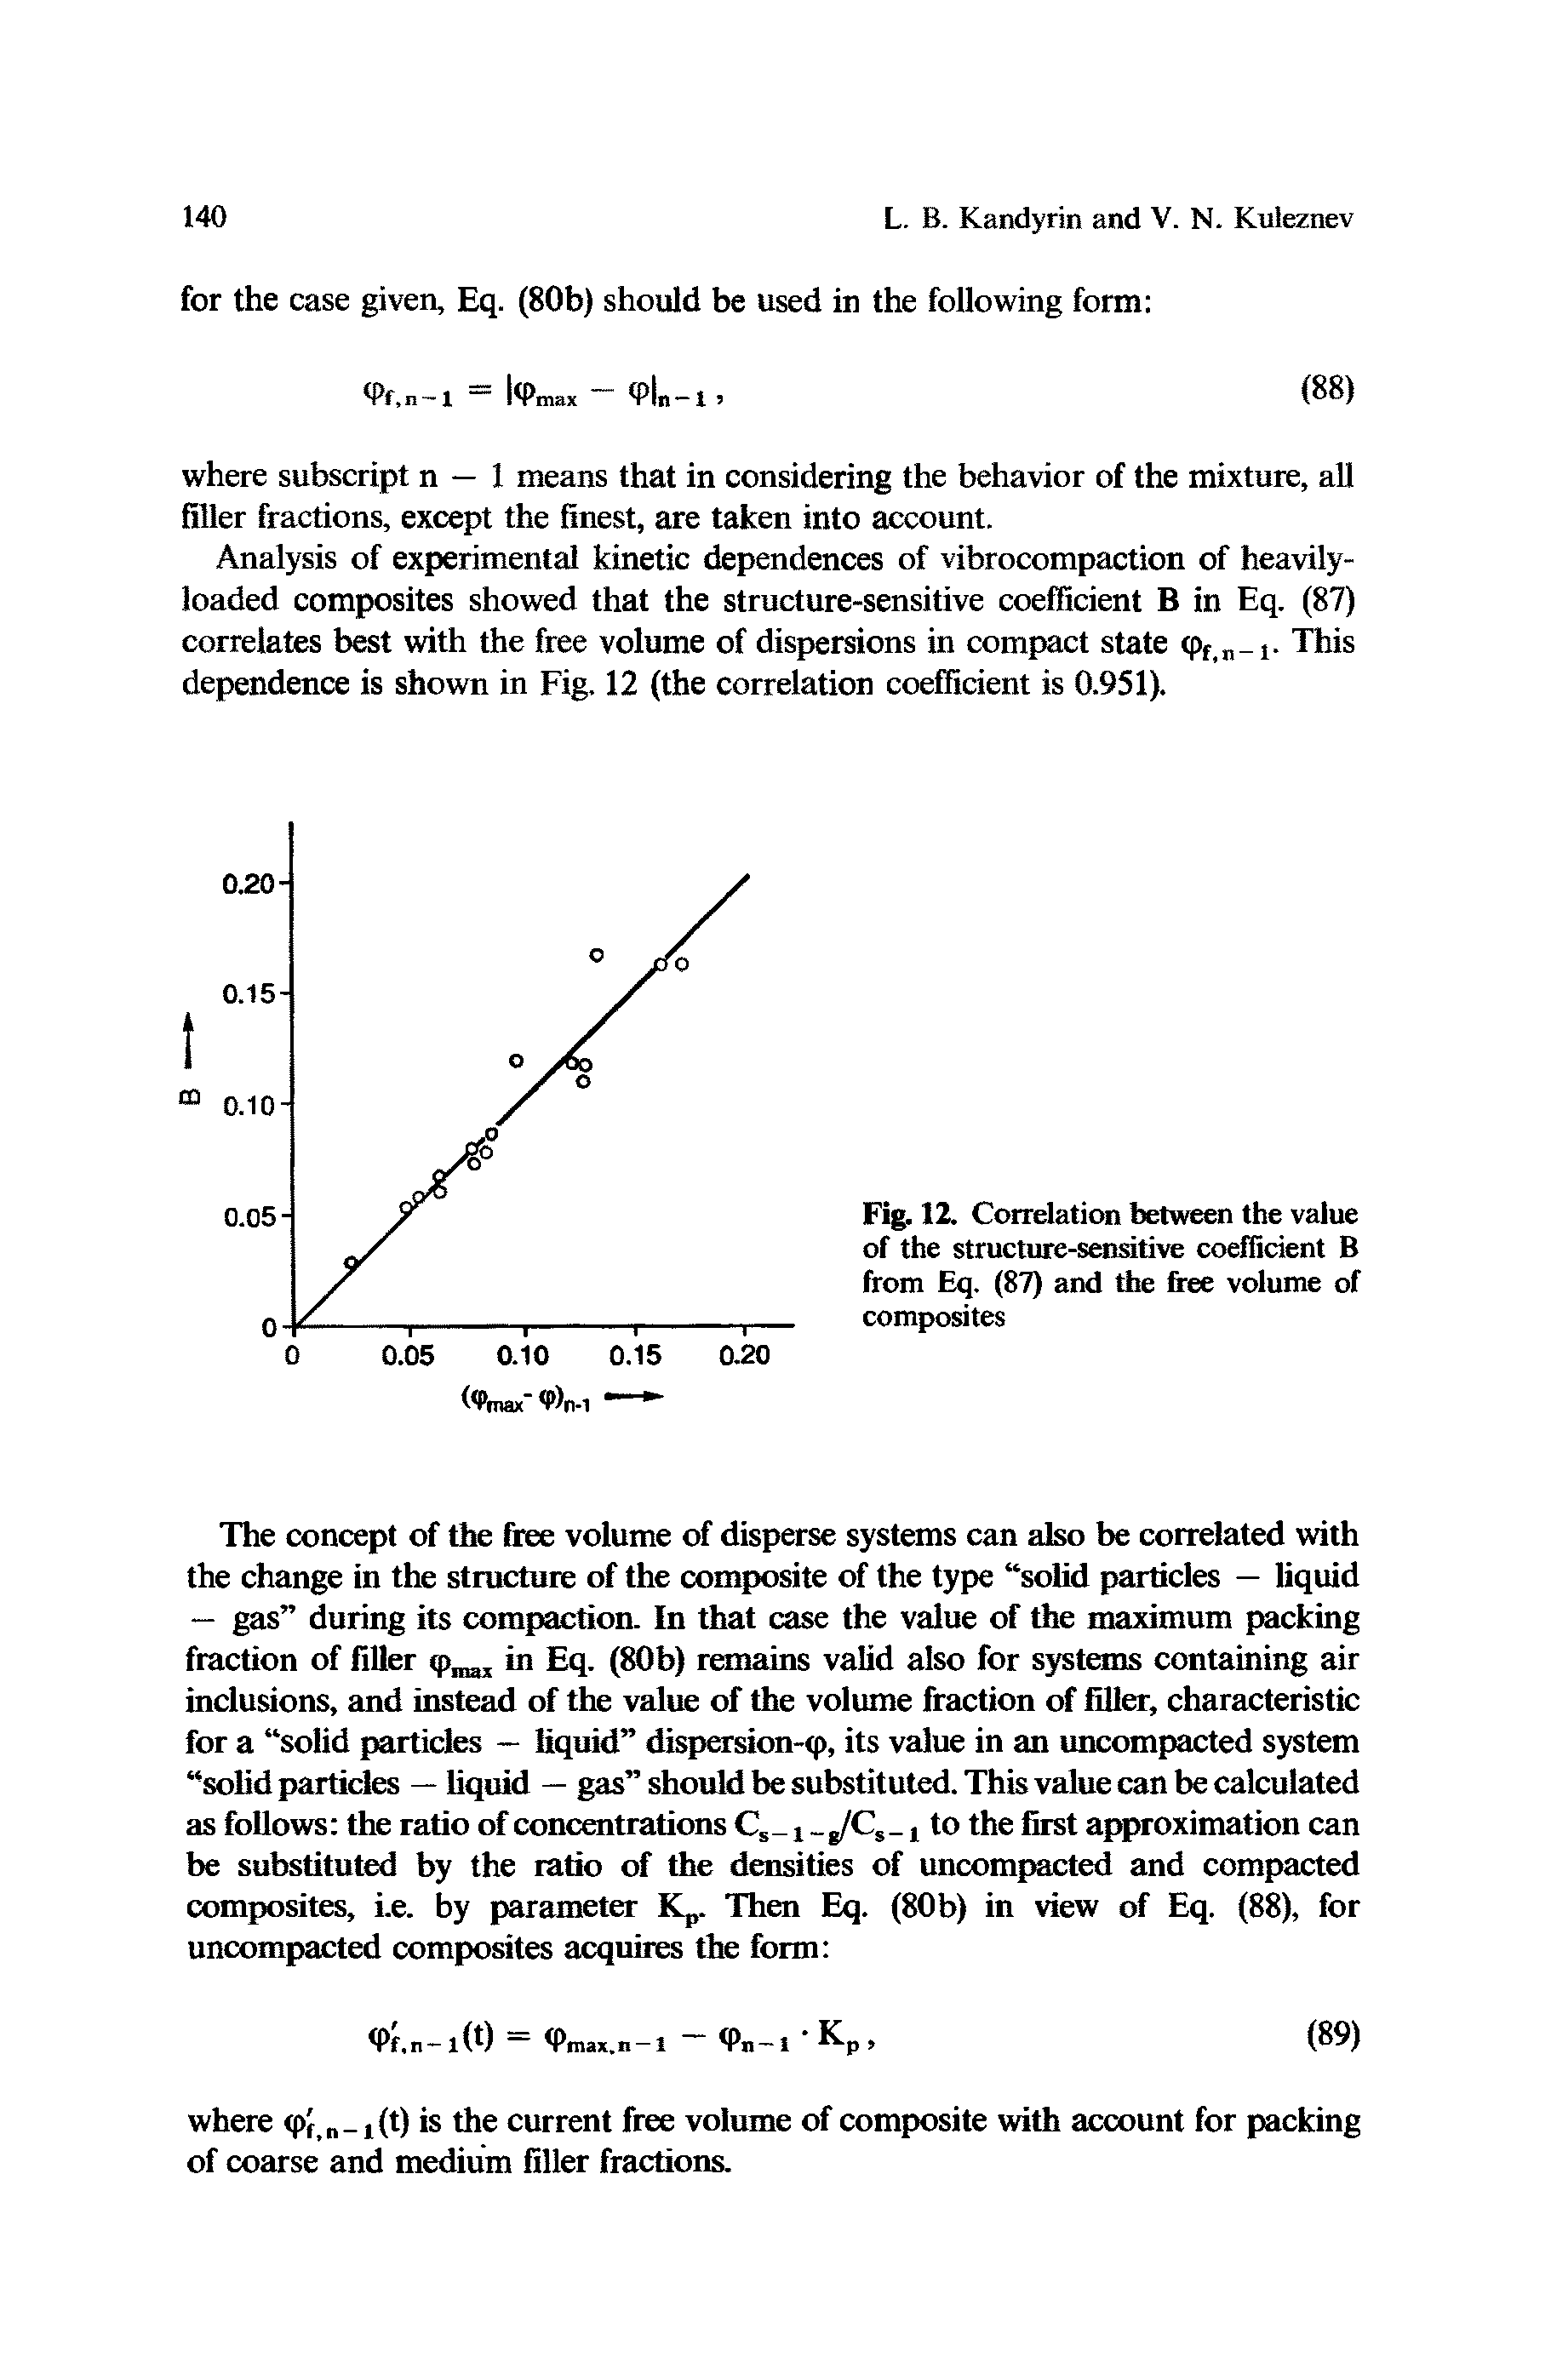 Fig. 12. Correlation between the value of the structure-sensitive coefficient B from Eq. (87) and the free volume of composites...